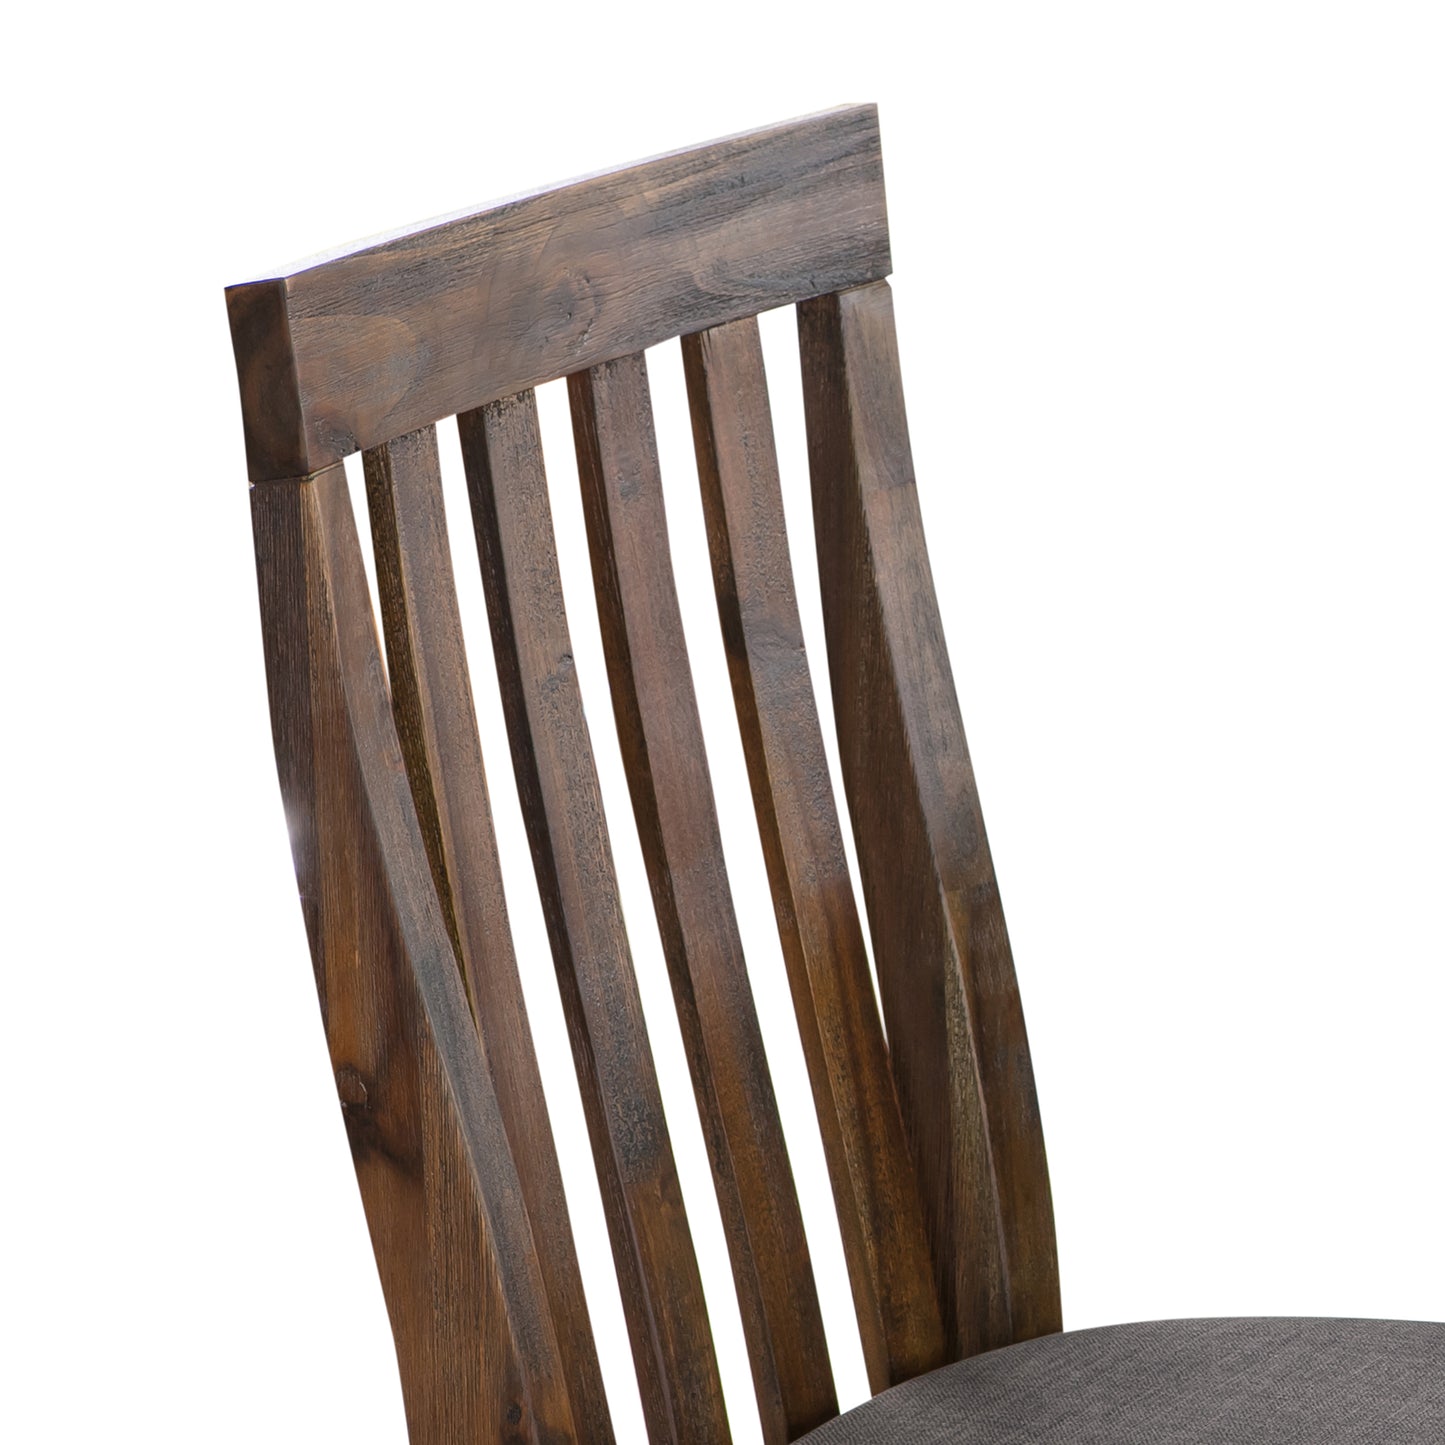 2x Wooden Frame Leatherette in Solid Wood Acacia & Veneer Dining Chairs in Chocolate Colour - image5